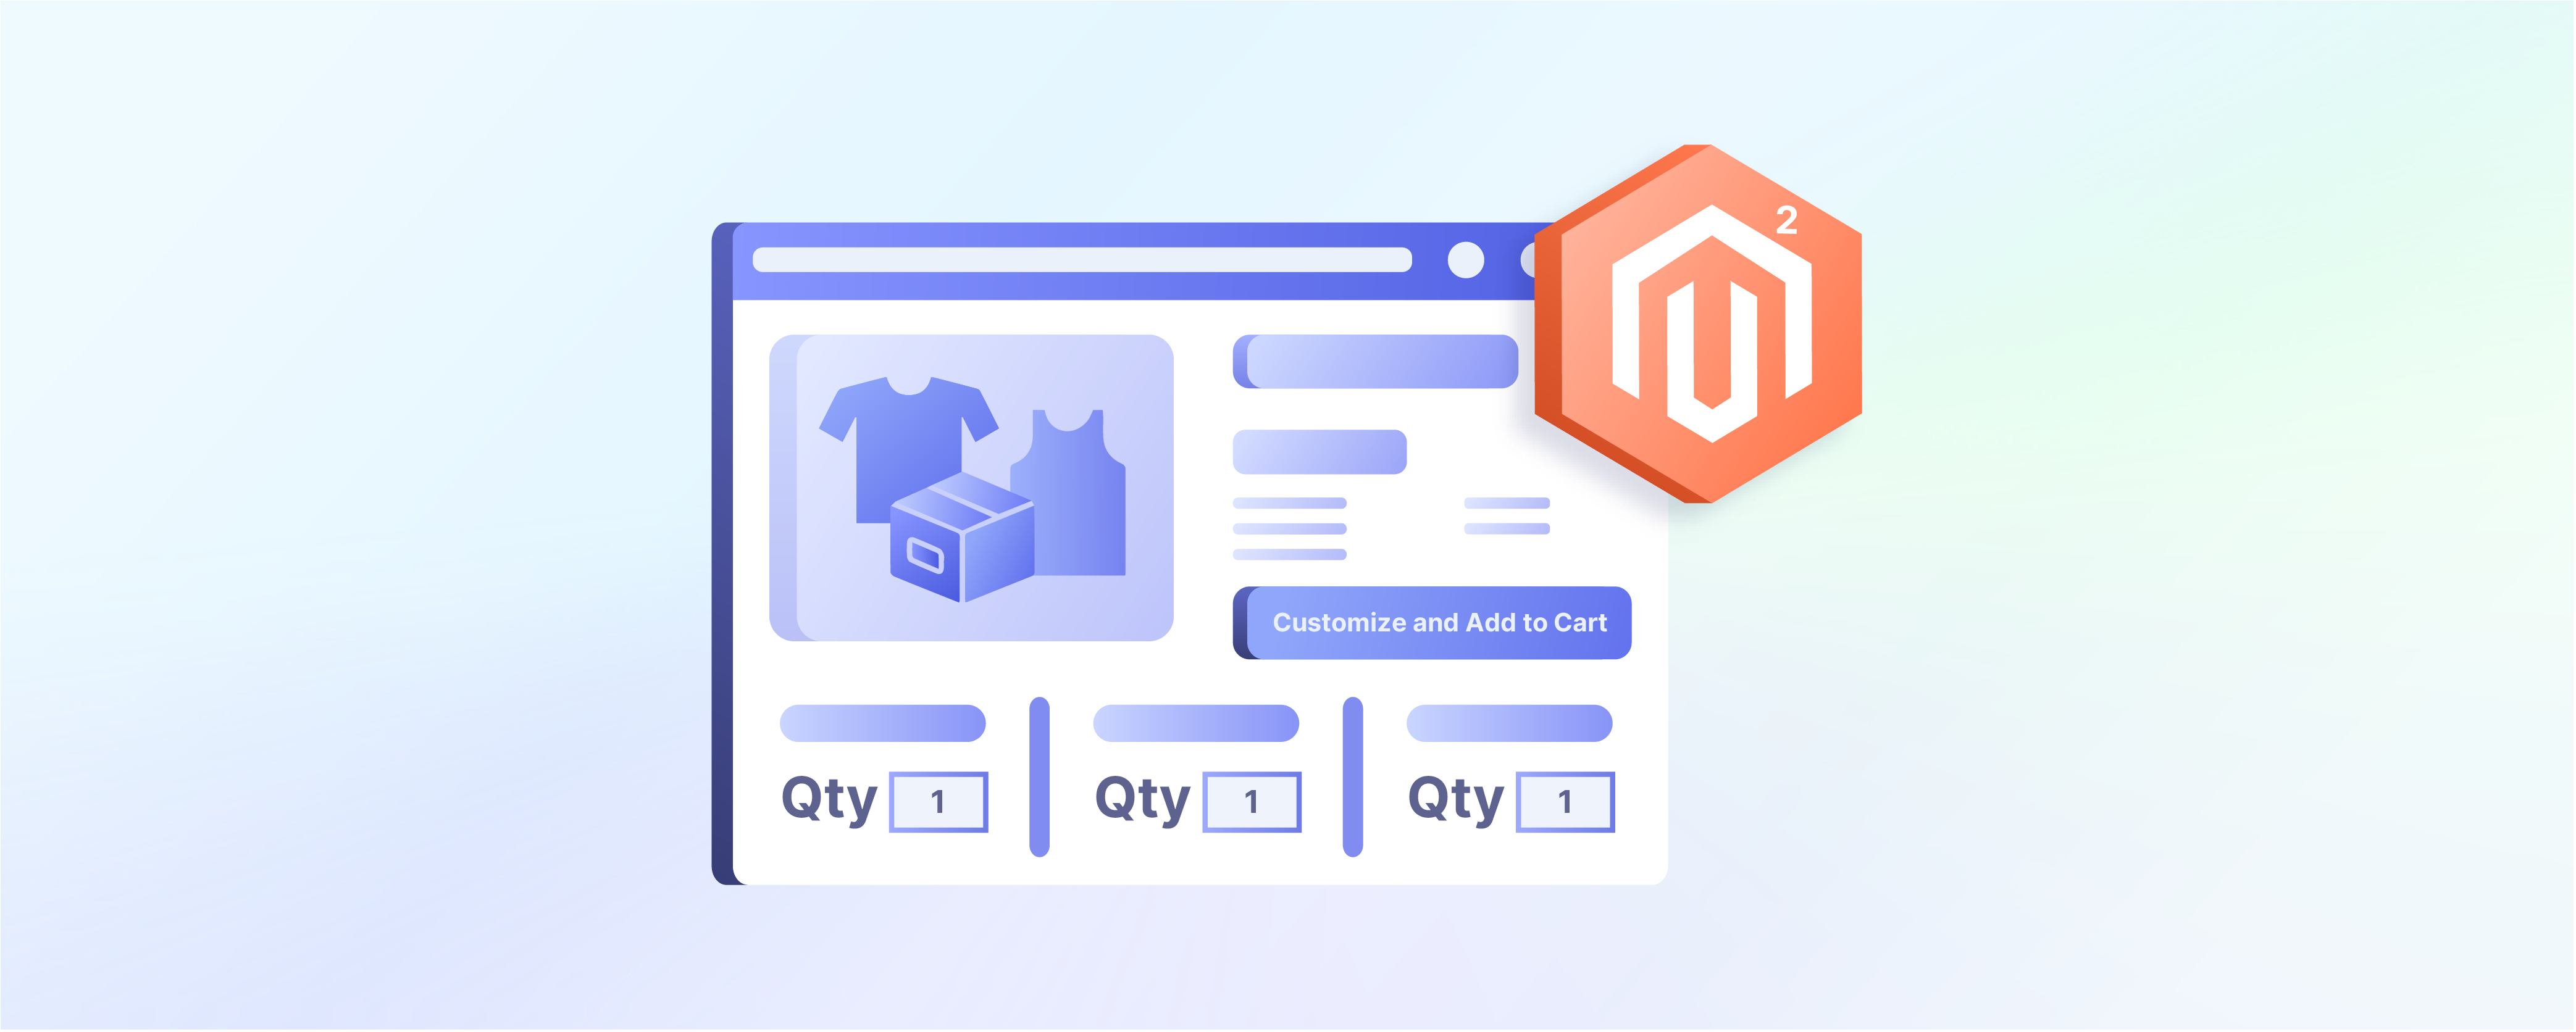 7 Steps to Configure Magento 2 Bundle Product with Custom Options